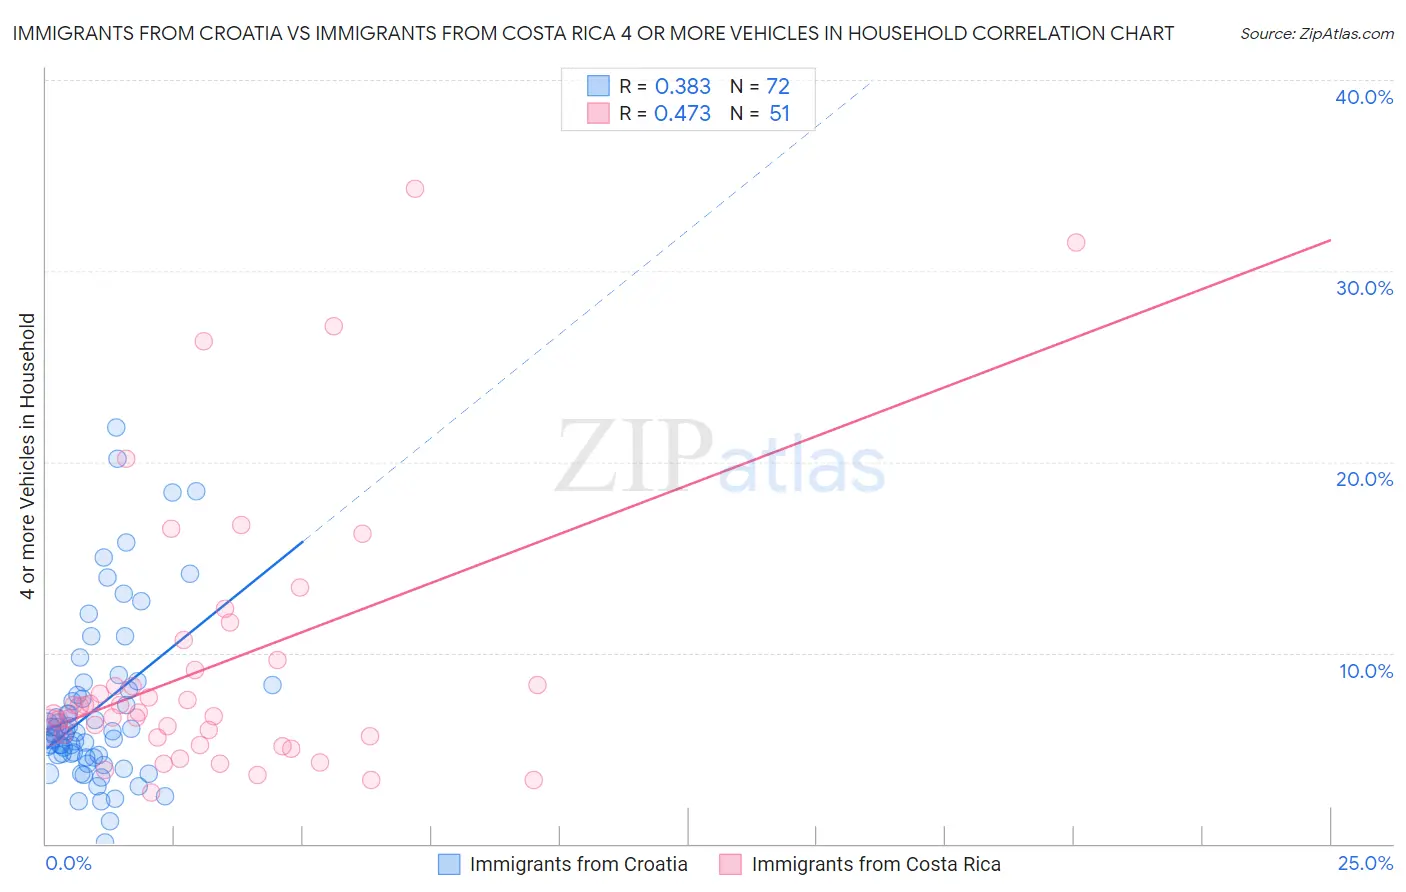 Immigrants from Croatia vs Immigrants from Costa Rica 4 or more Vehicles in Household